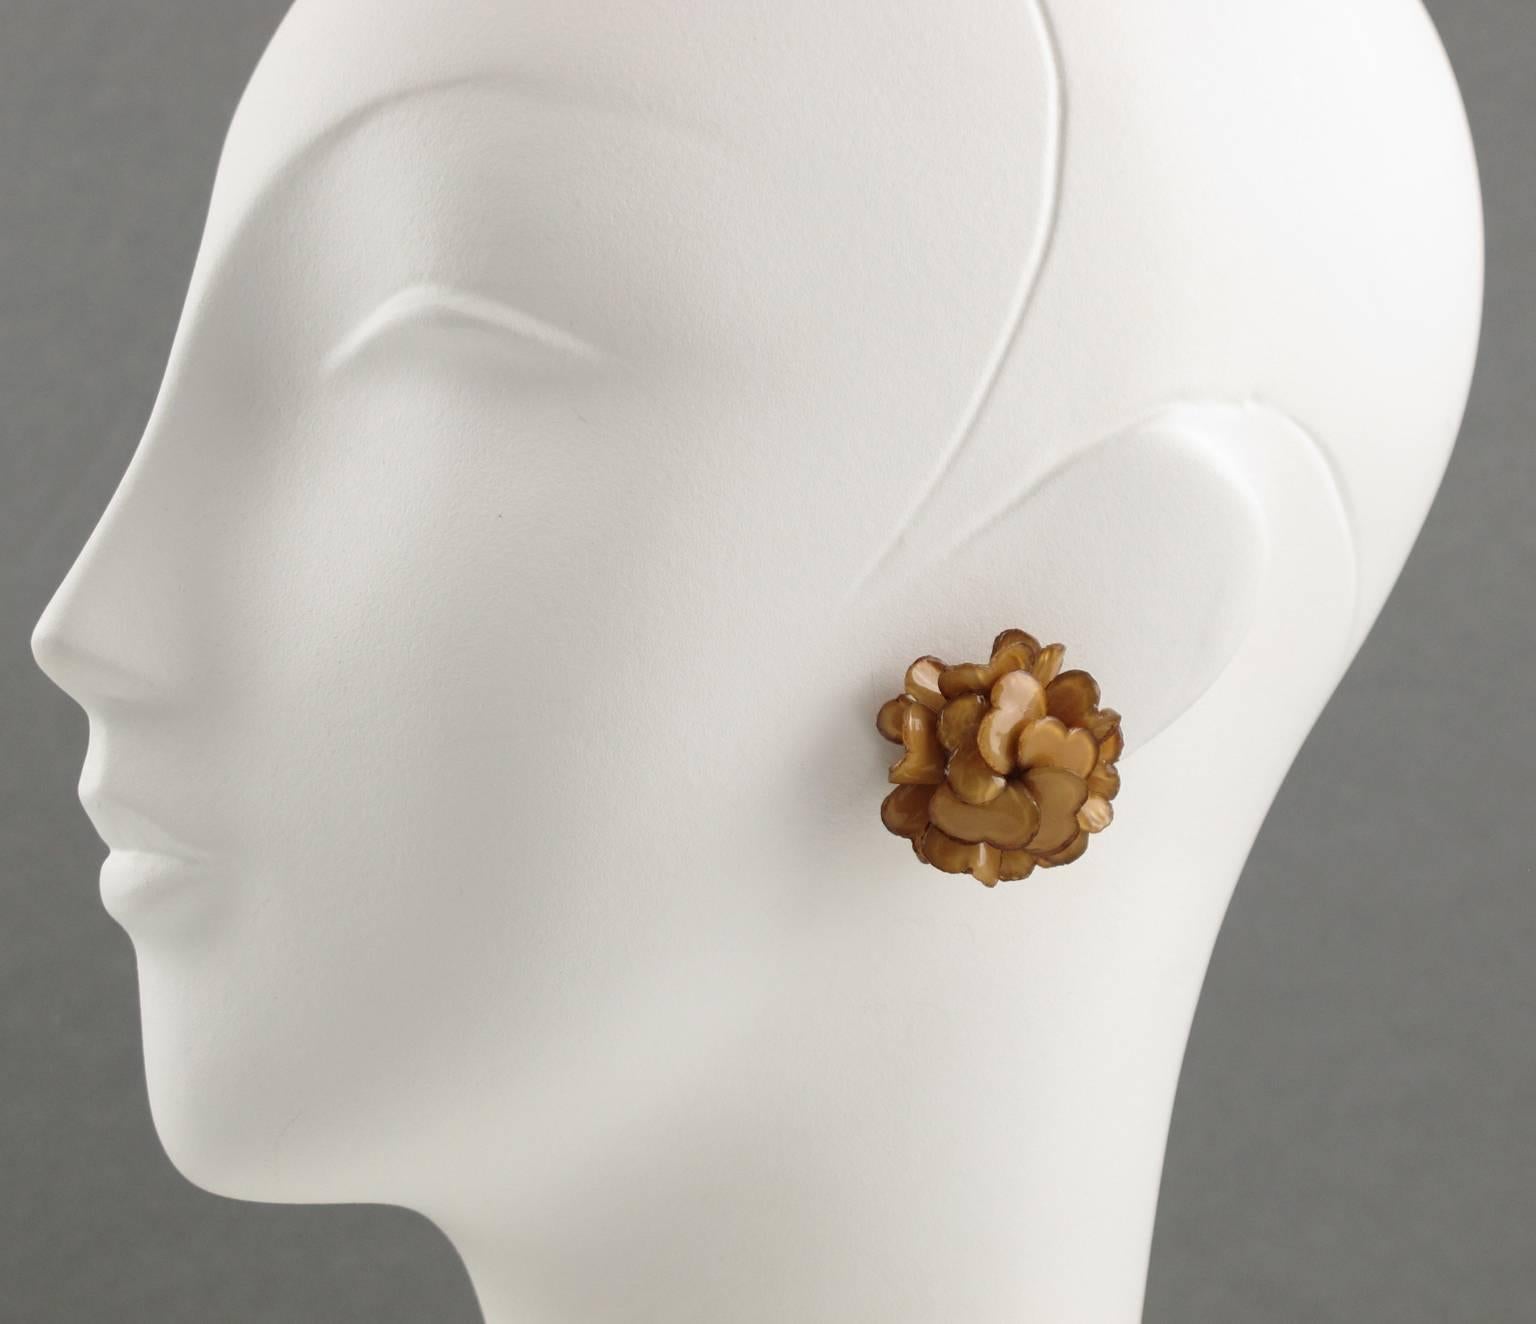 French Jewelry Designer FRANCOISE MONTAGUE Paris clip on Earrings. Fabulous dimensional shape, in resin or talosel, featuring rose flower in elegant nude tone and clip back. Excellent vintage condition. 

Measurements: 1.19 in. diameter (3 cm)